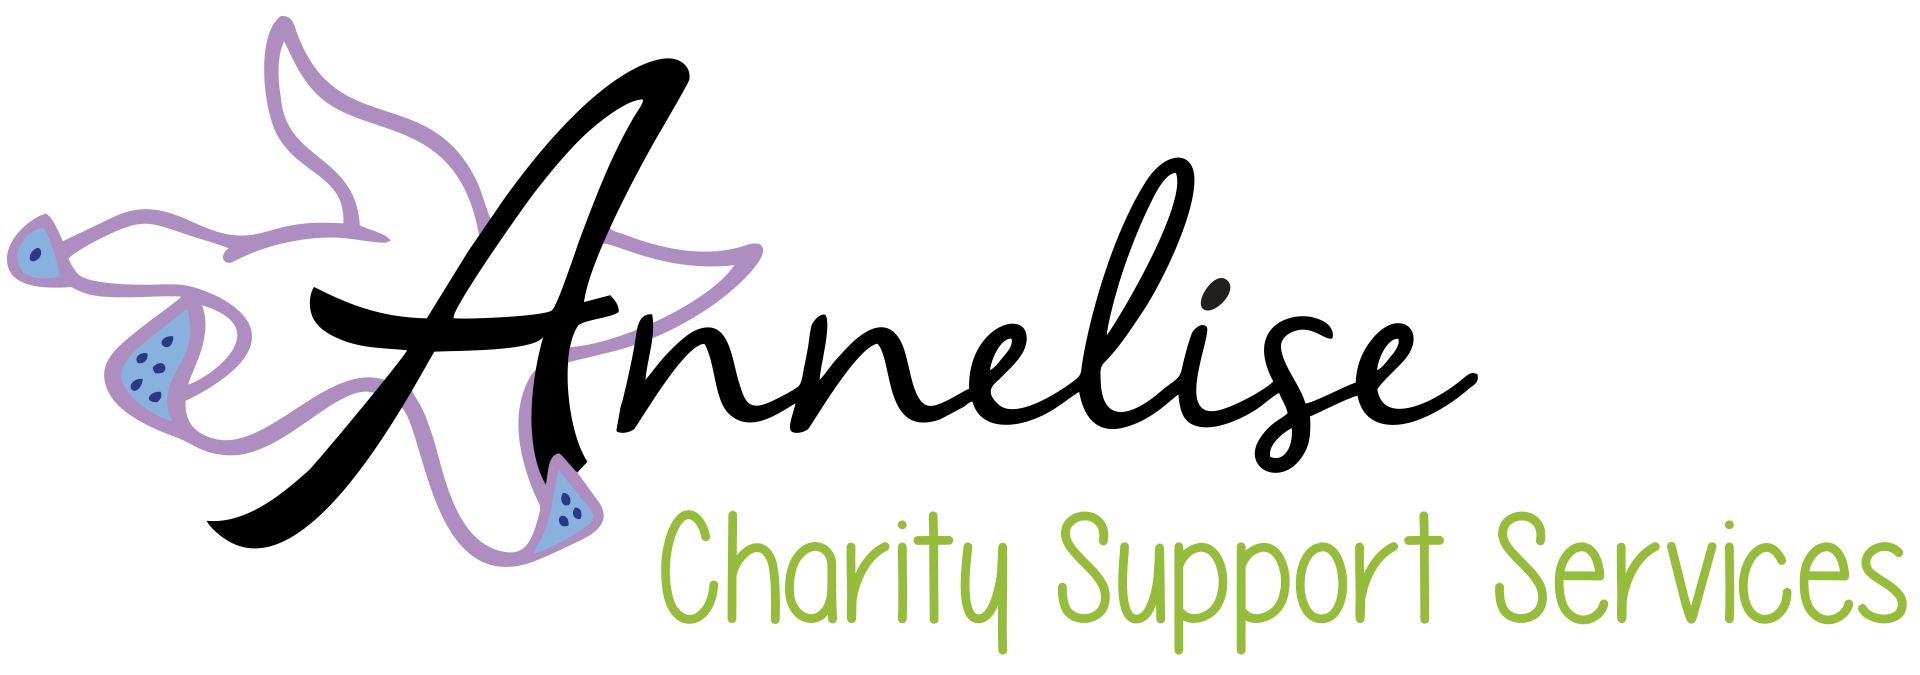 Annelise - Charity Support Services